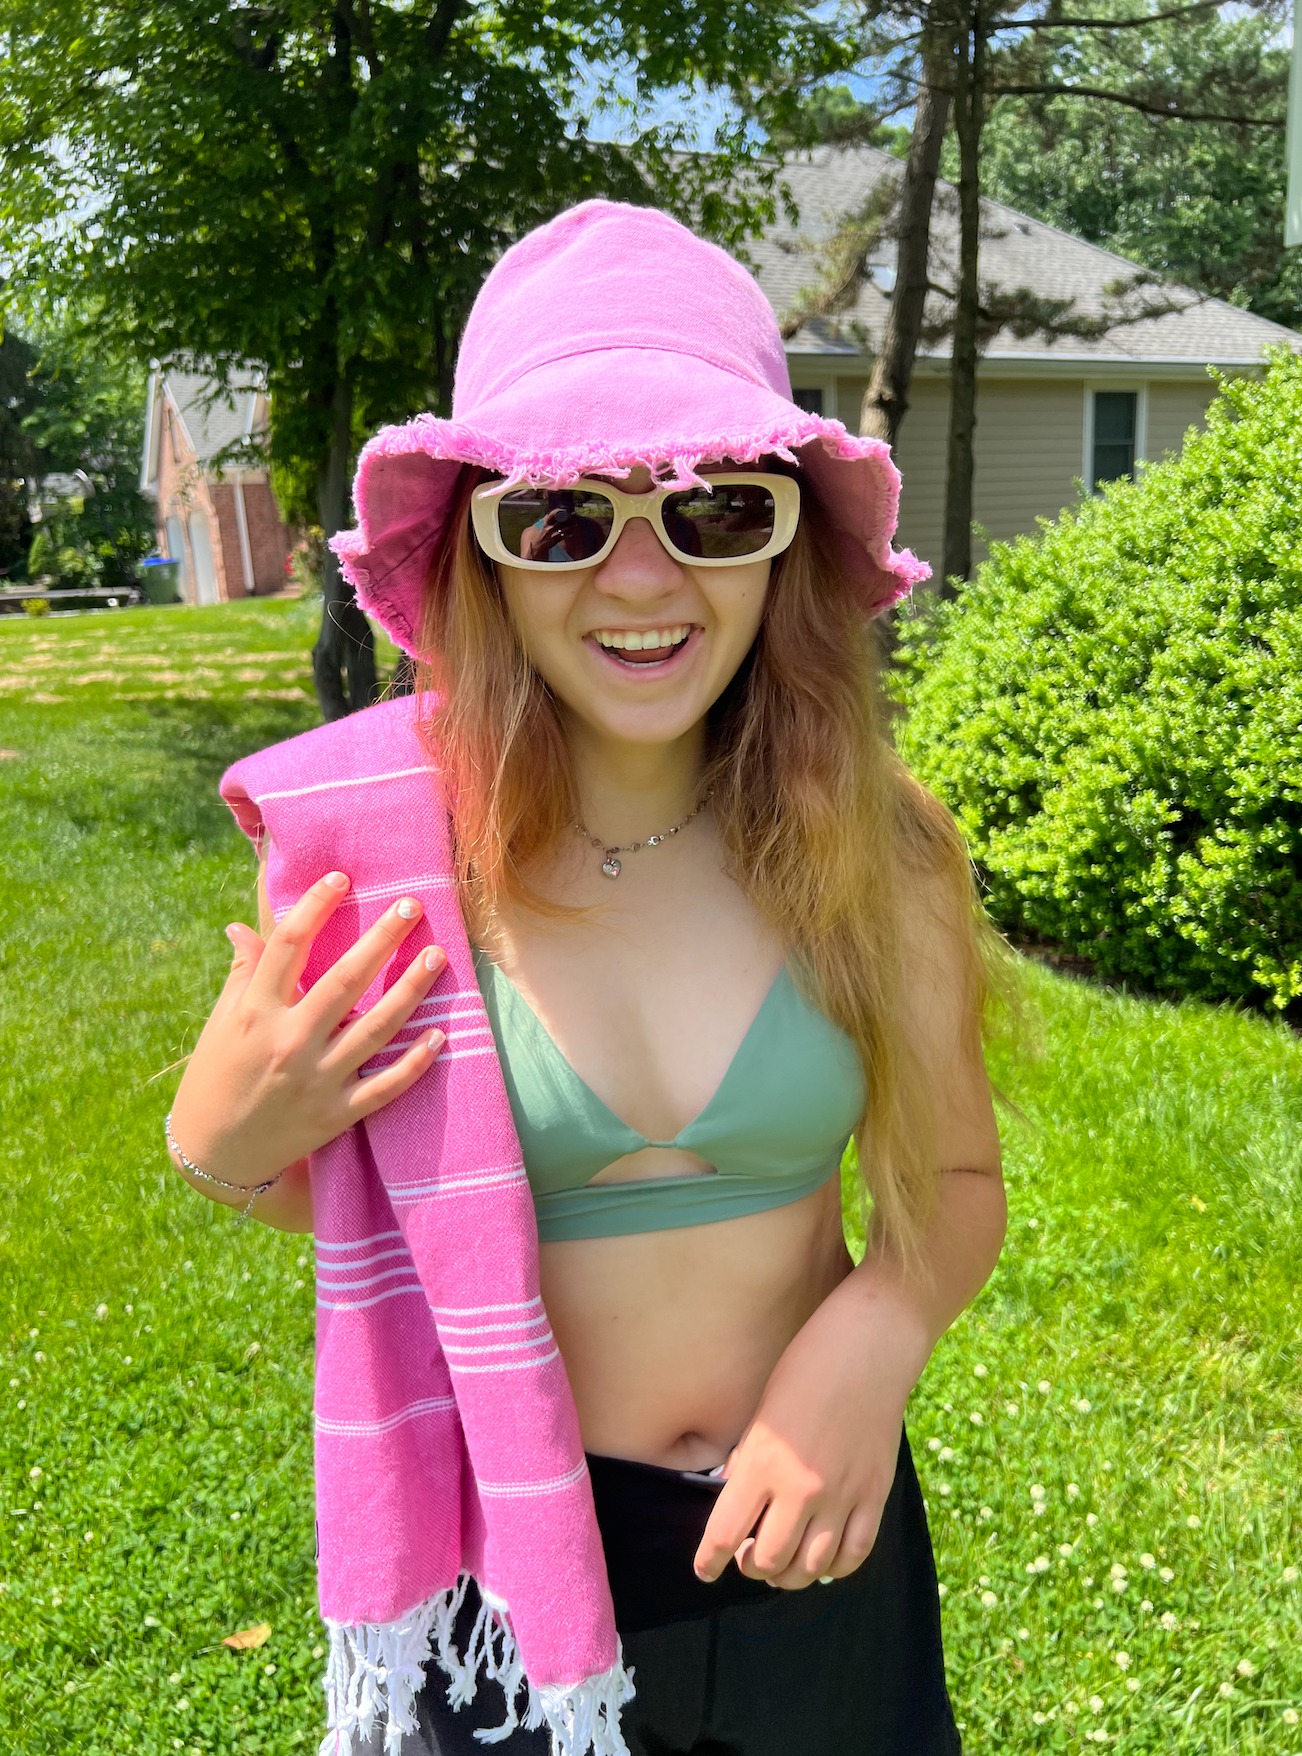 Turkish Towel Pink Hat Sunglasses Going to Pool Party